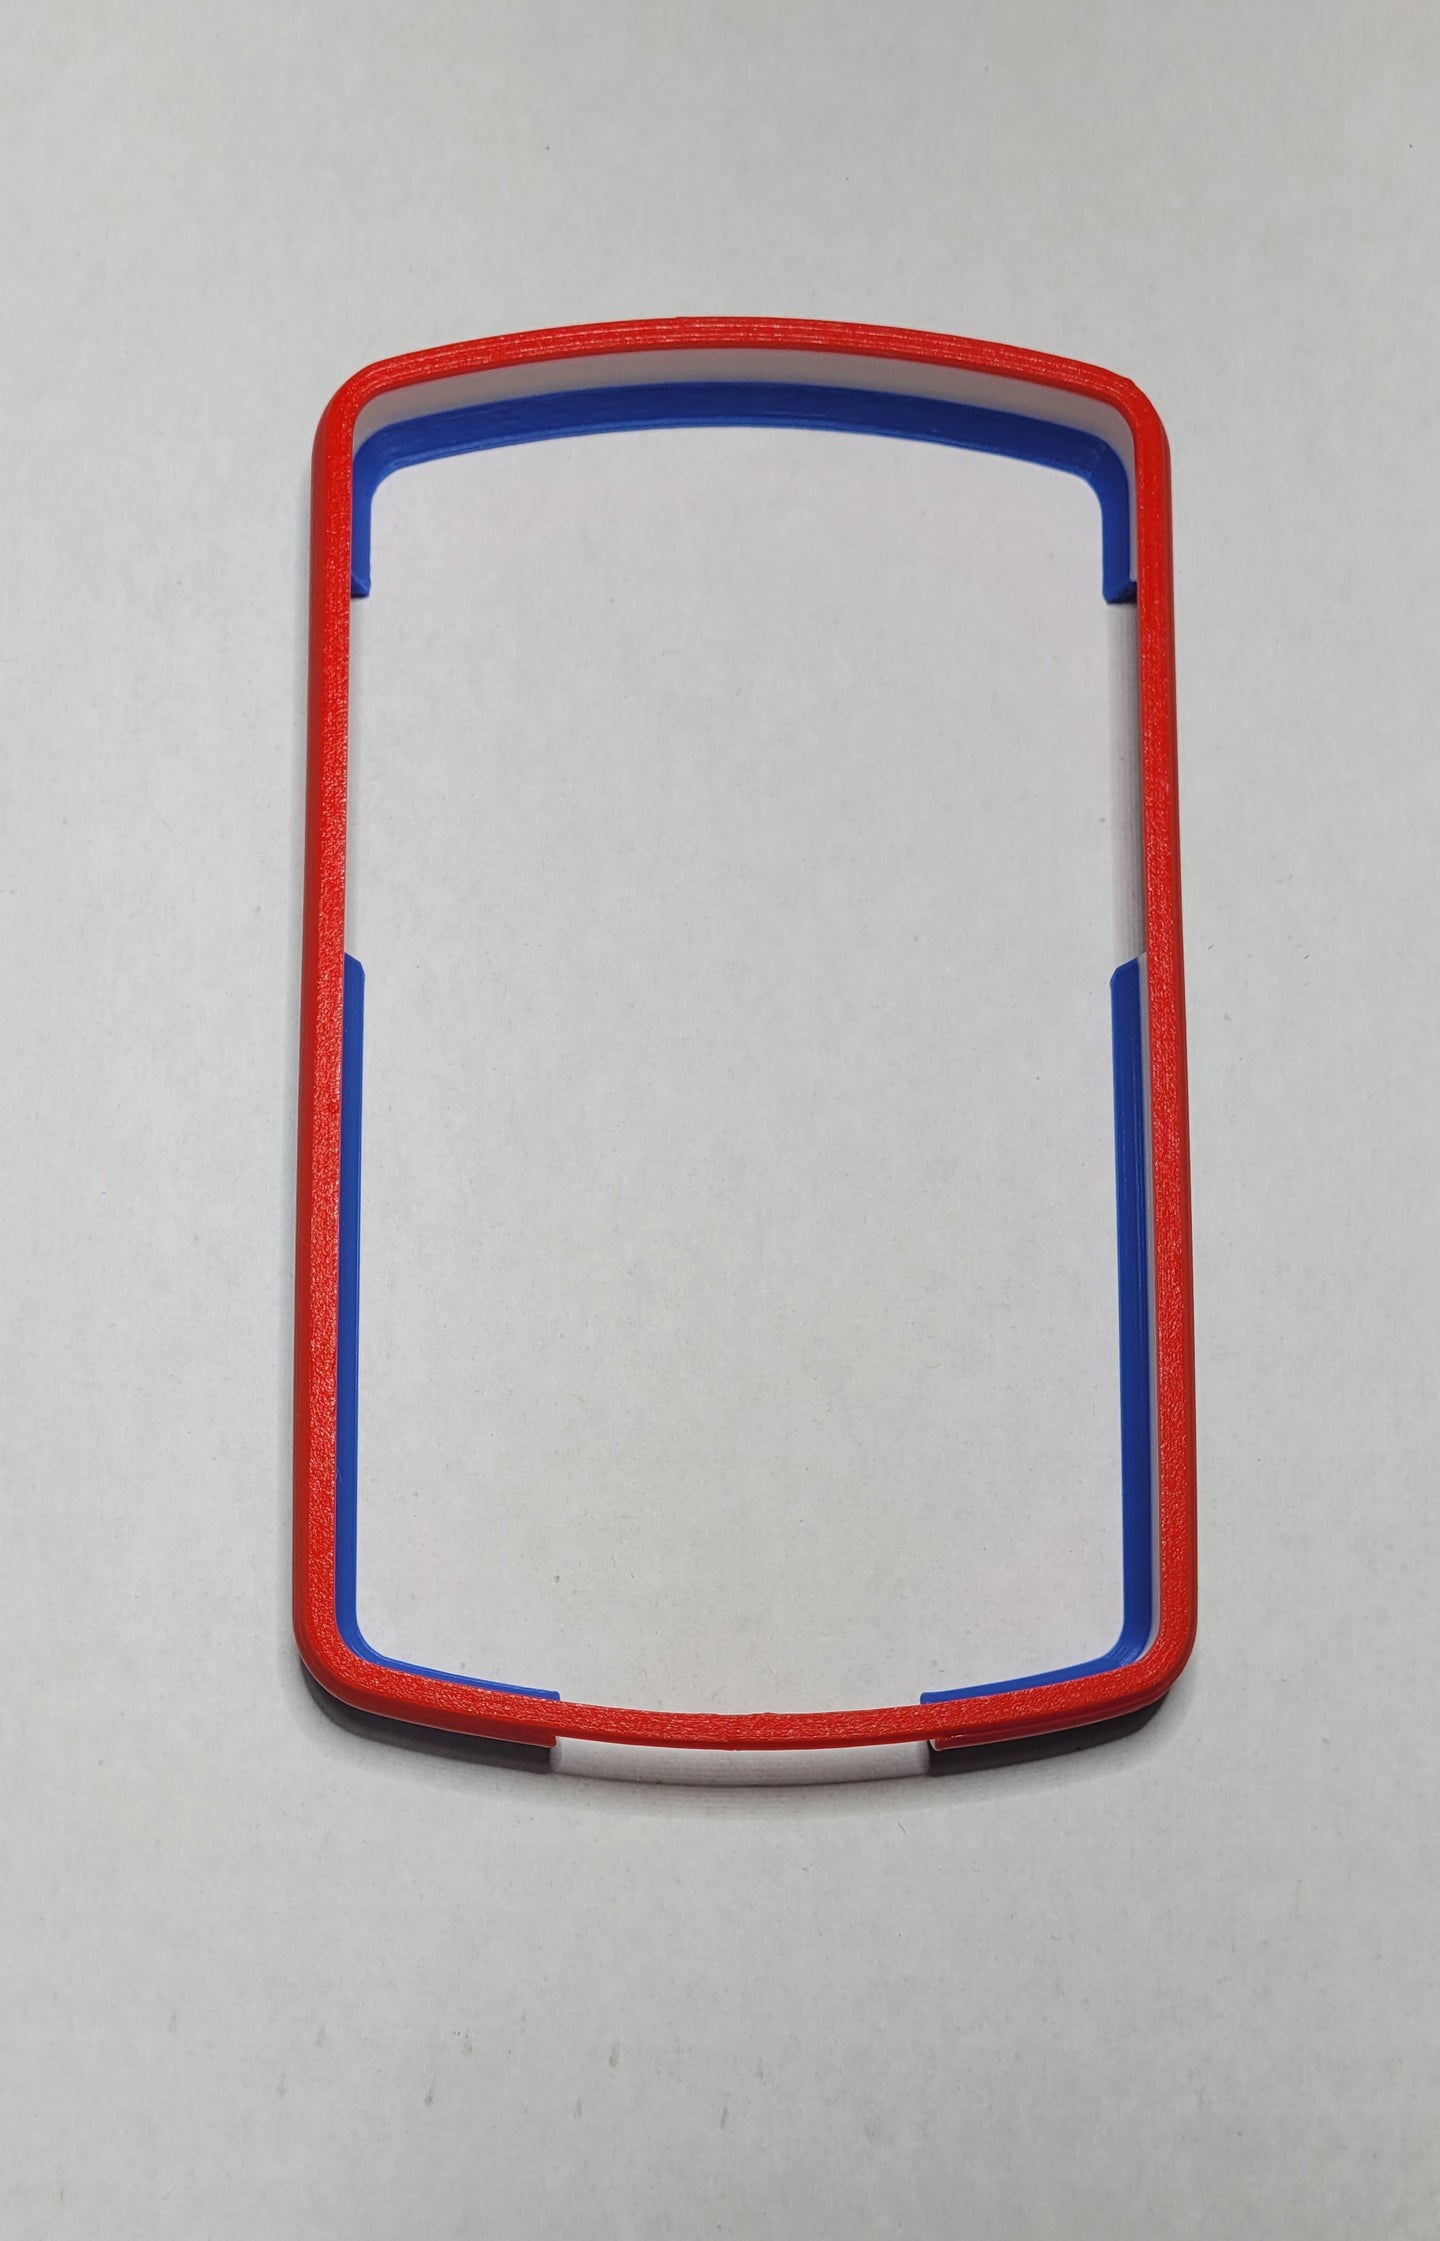 3d printed minelab protective cover red, white and blue